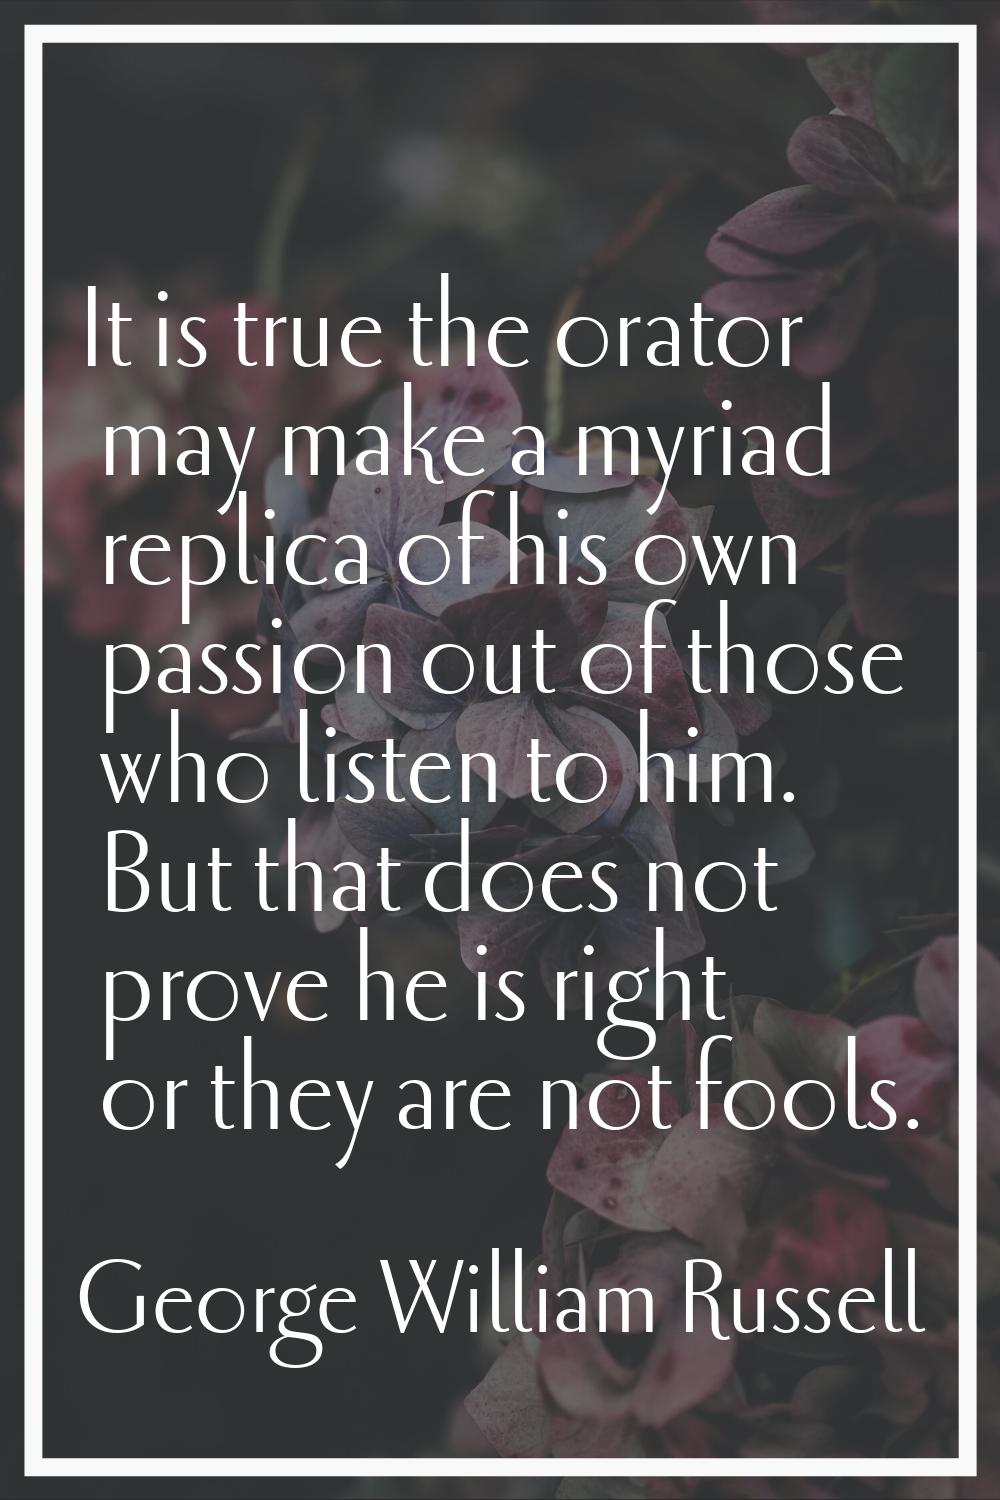 It is true the orator may make a myriad replica of his own passion out of those who listen to him. 